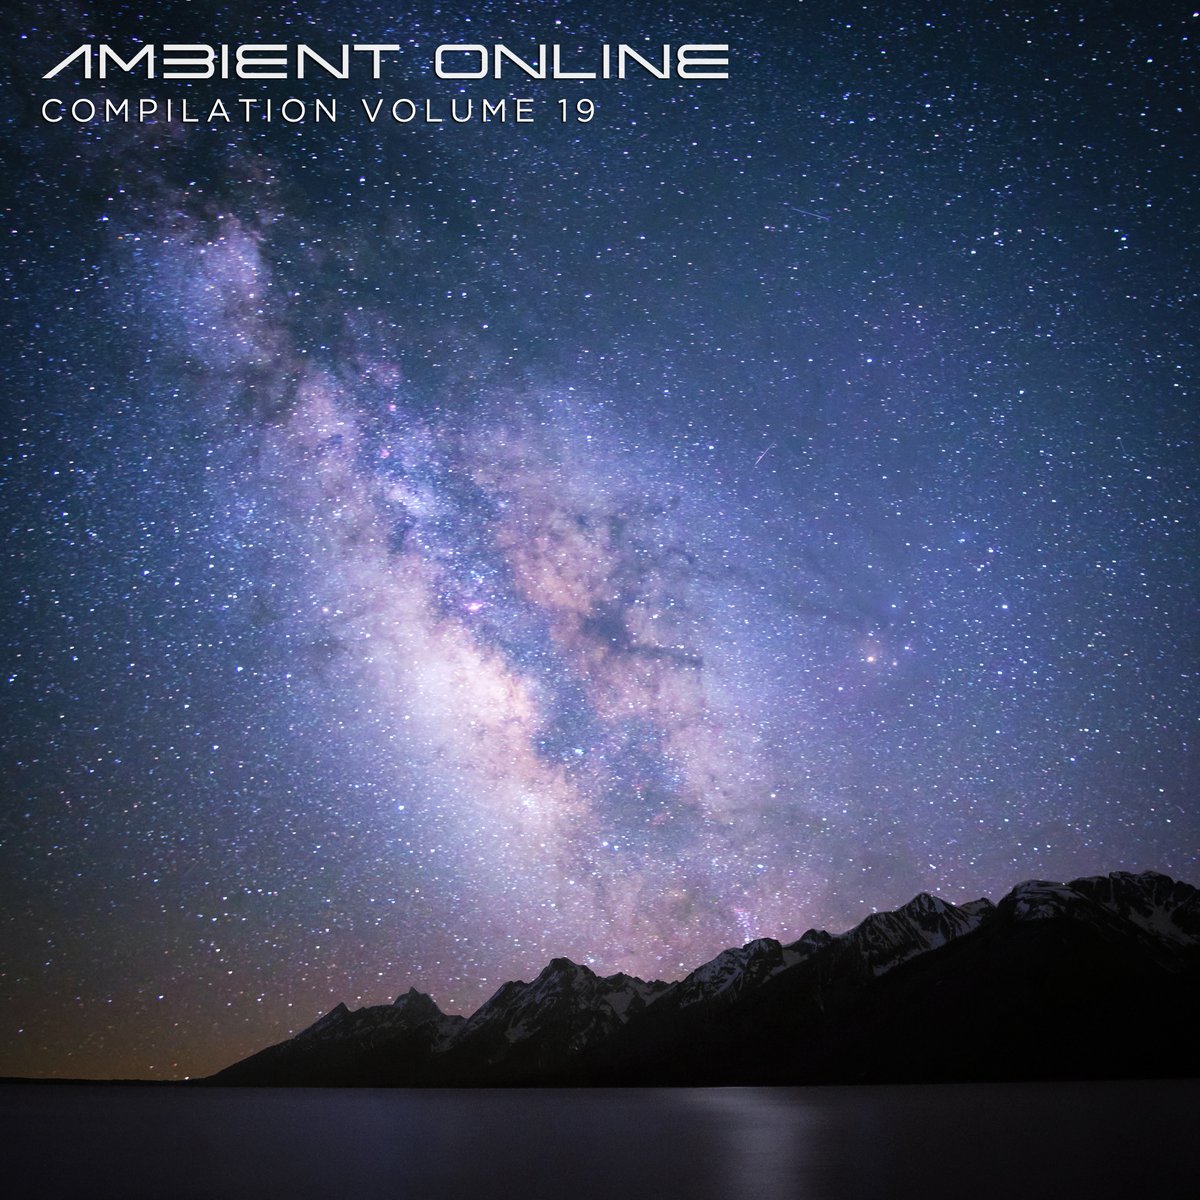 Out now! Over 5 hours of new #ambient music from the Ambient Online community: ambientonline.bandcamp.com/album/ambient-… #ambientonline